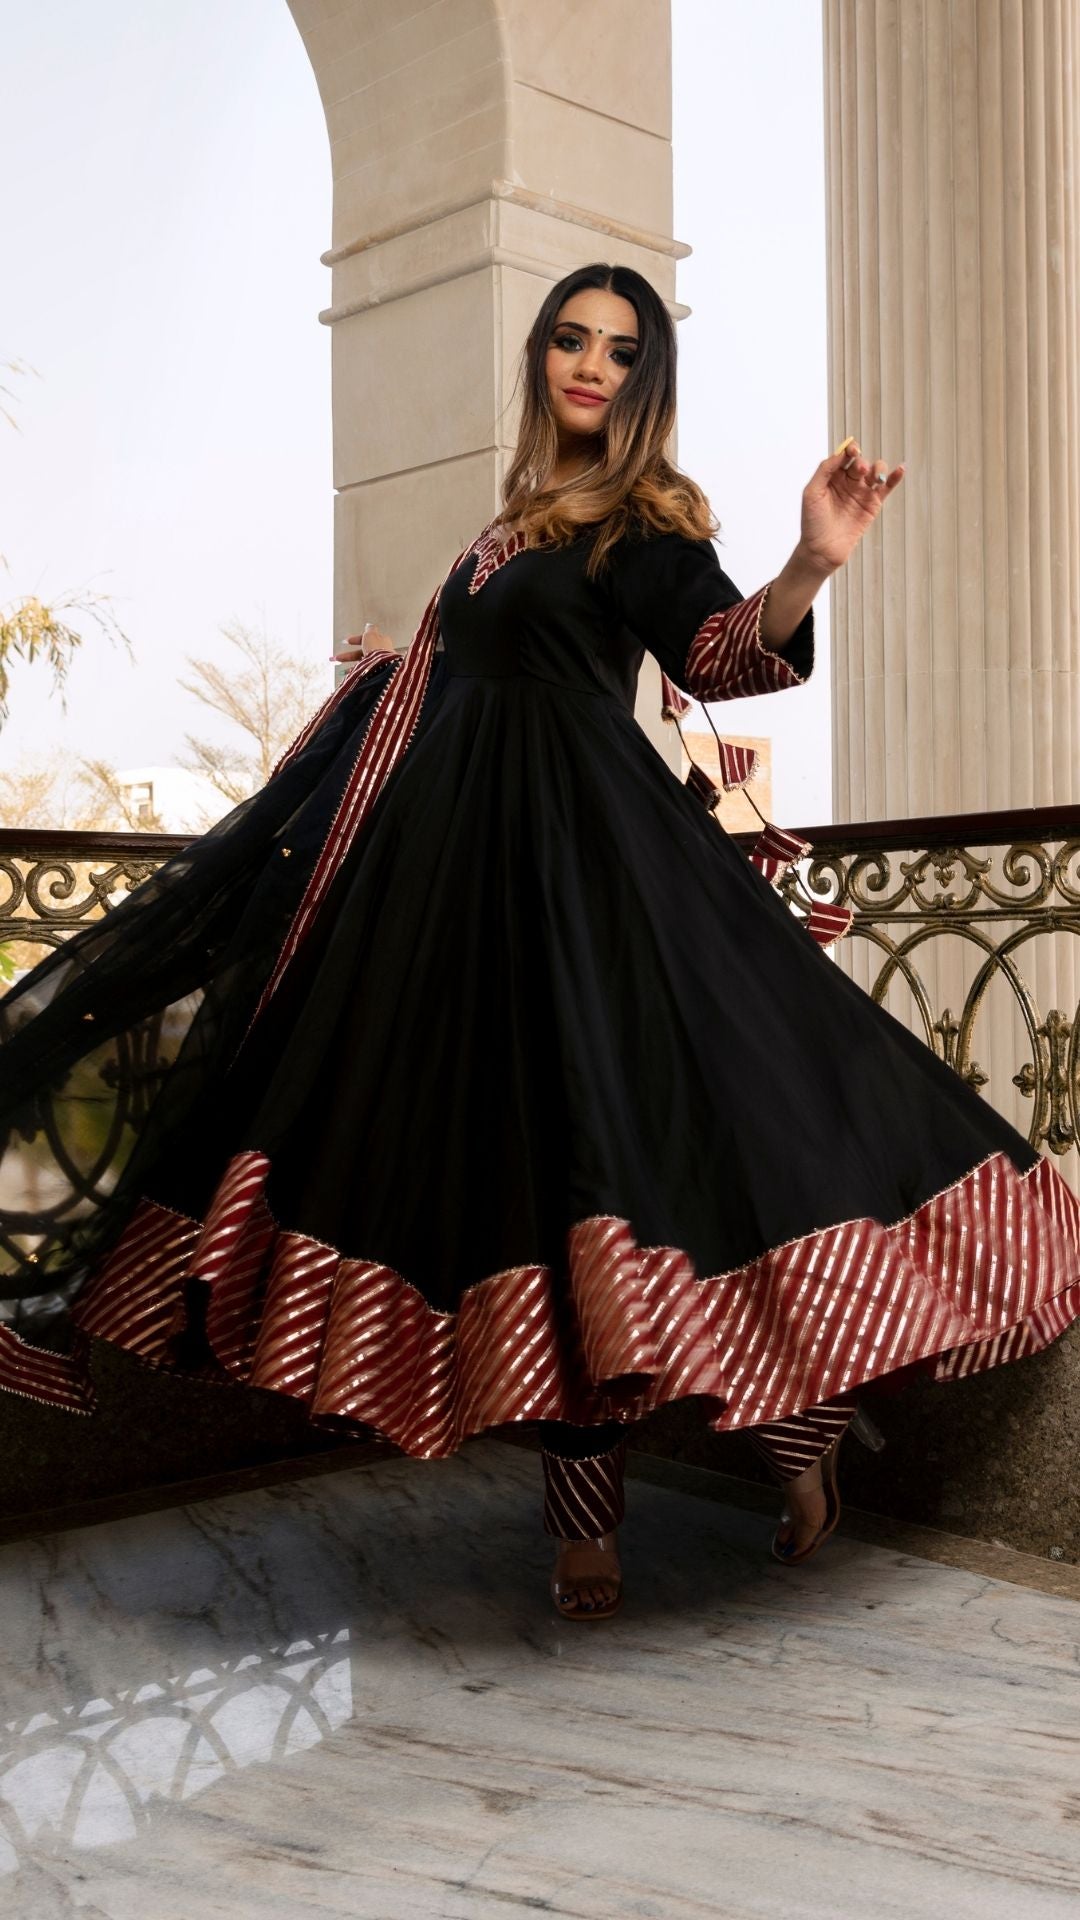 Anarkali Suit - Buy Latest Anarkali Suits Online in USA and Canada